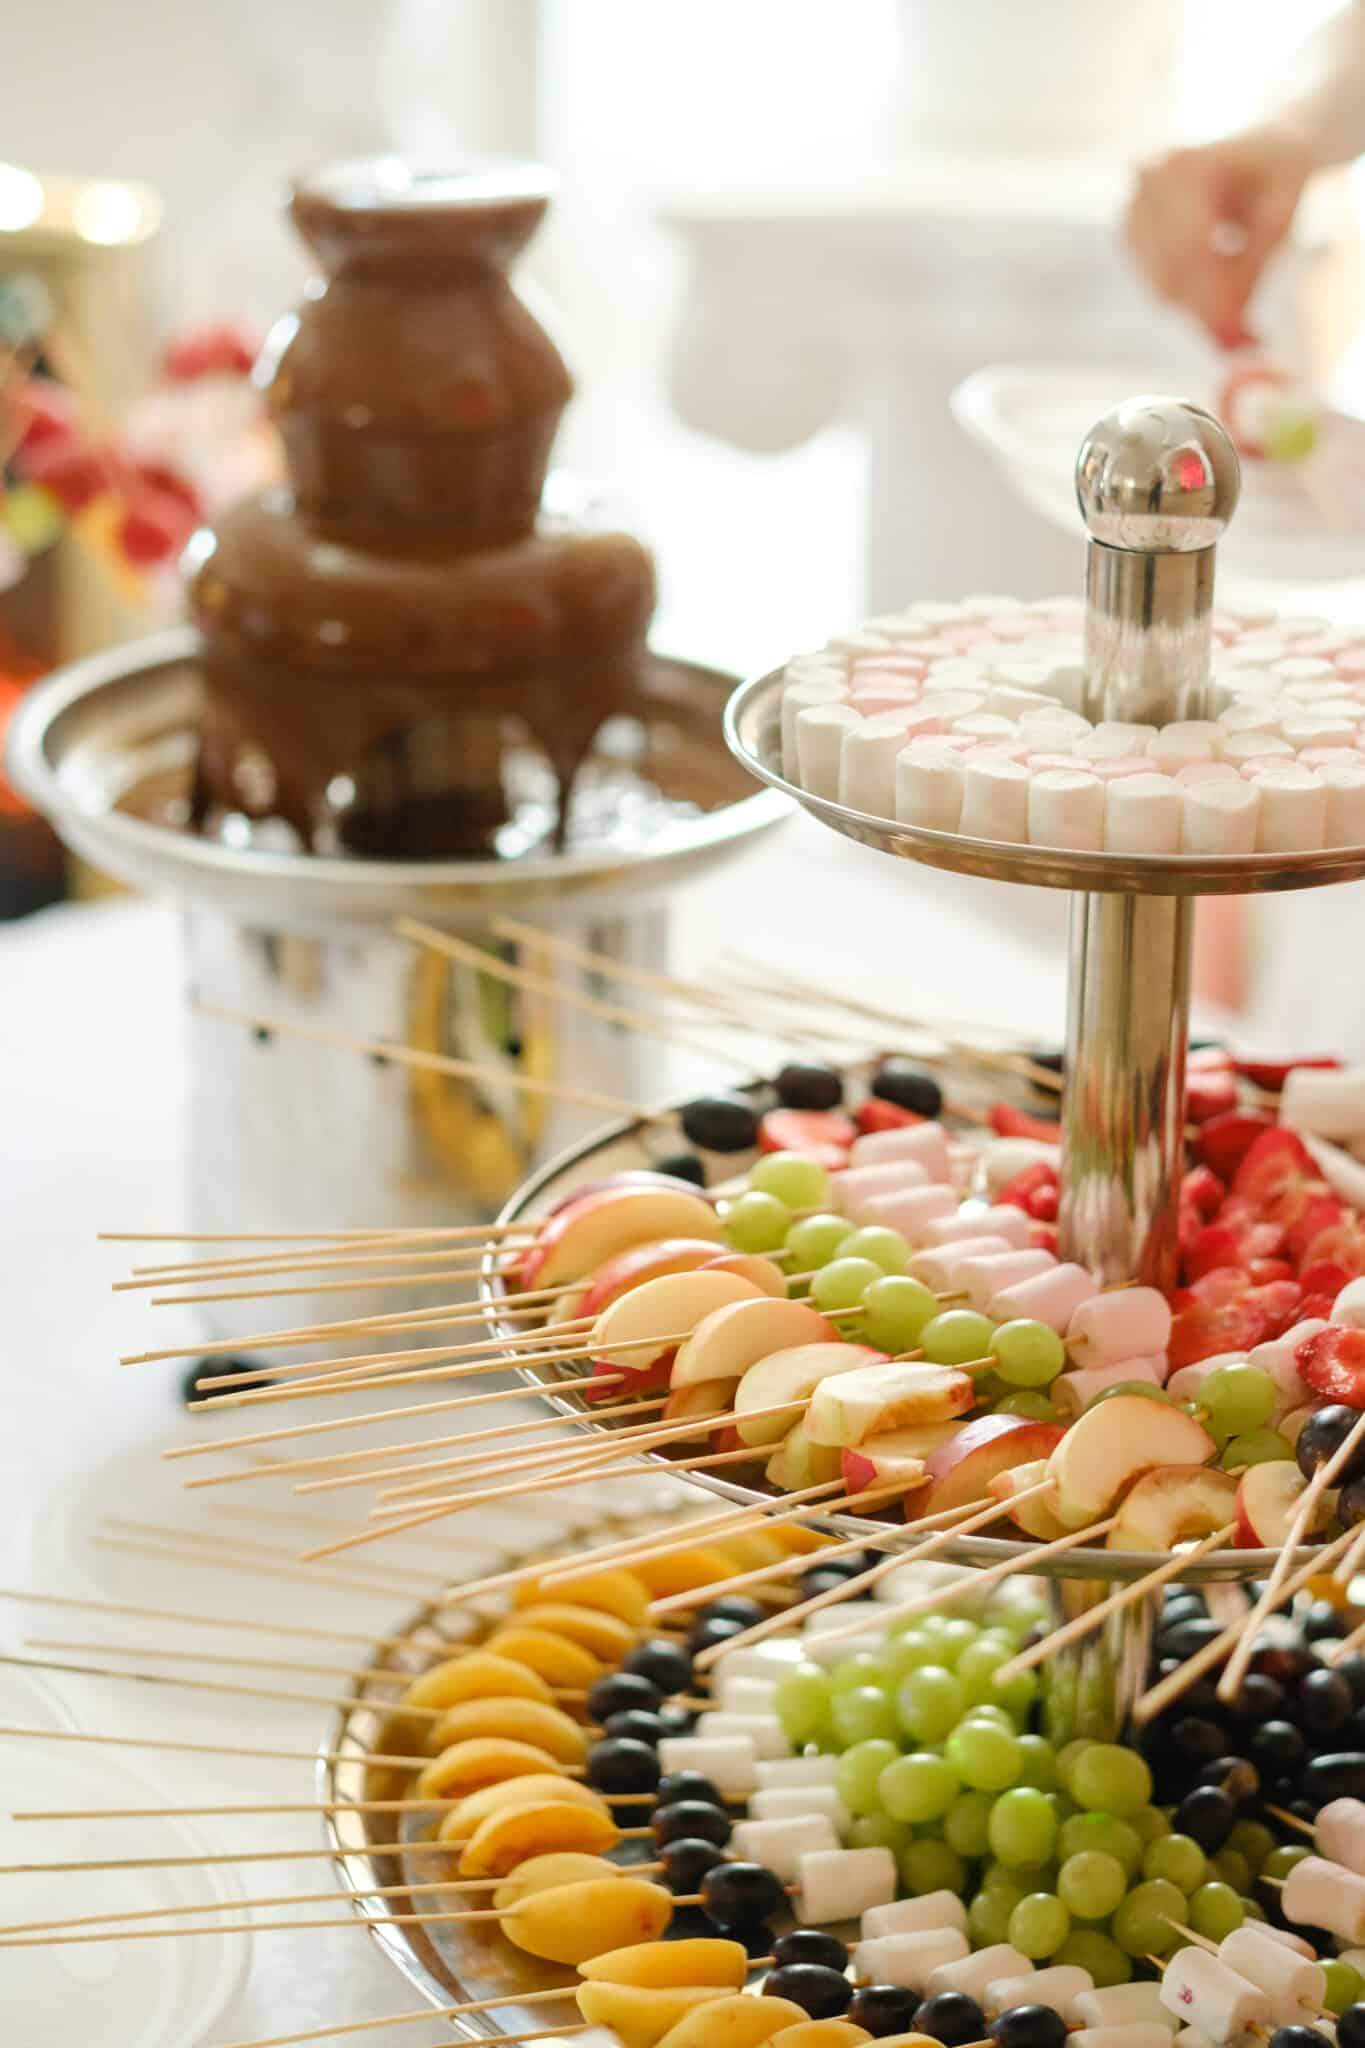 chocolate fountain with display of fruit and sweets for dipping